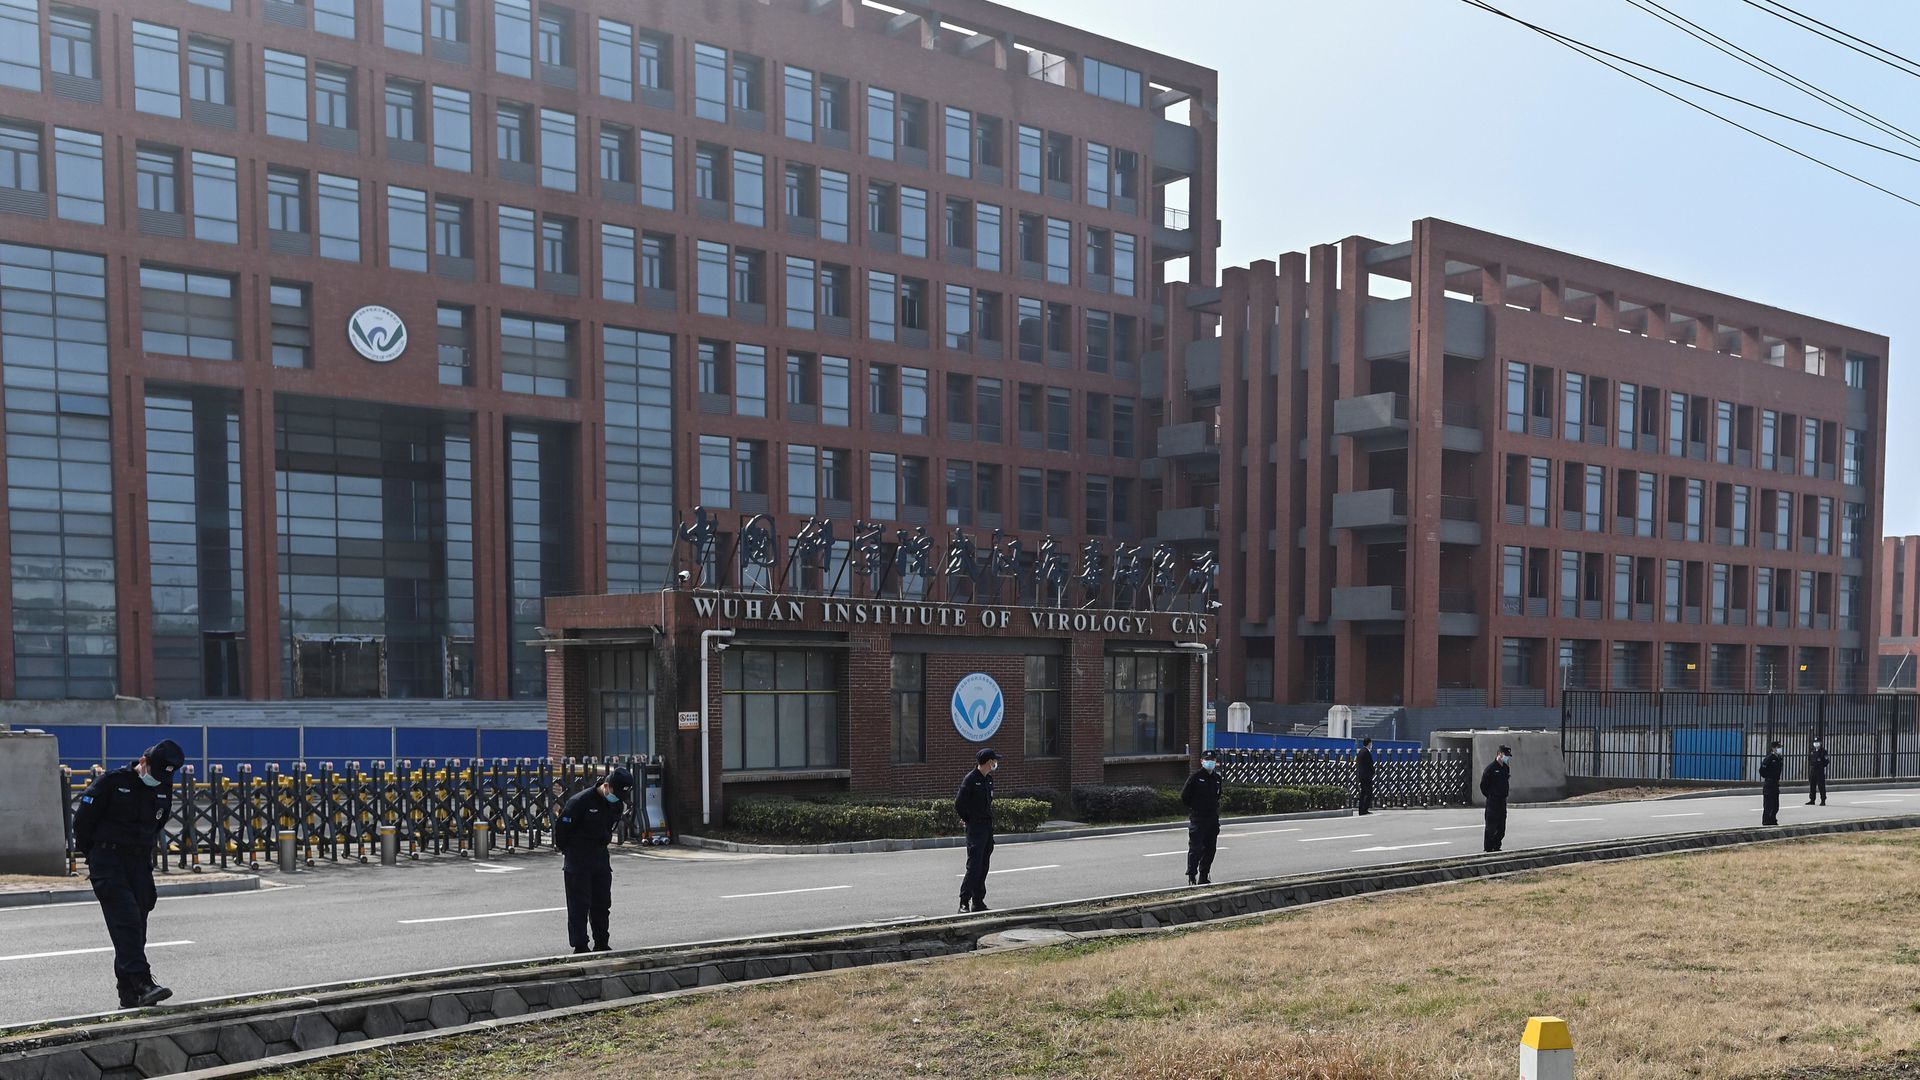 Picture of the Wuhan Institute of Virology